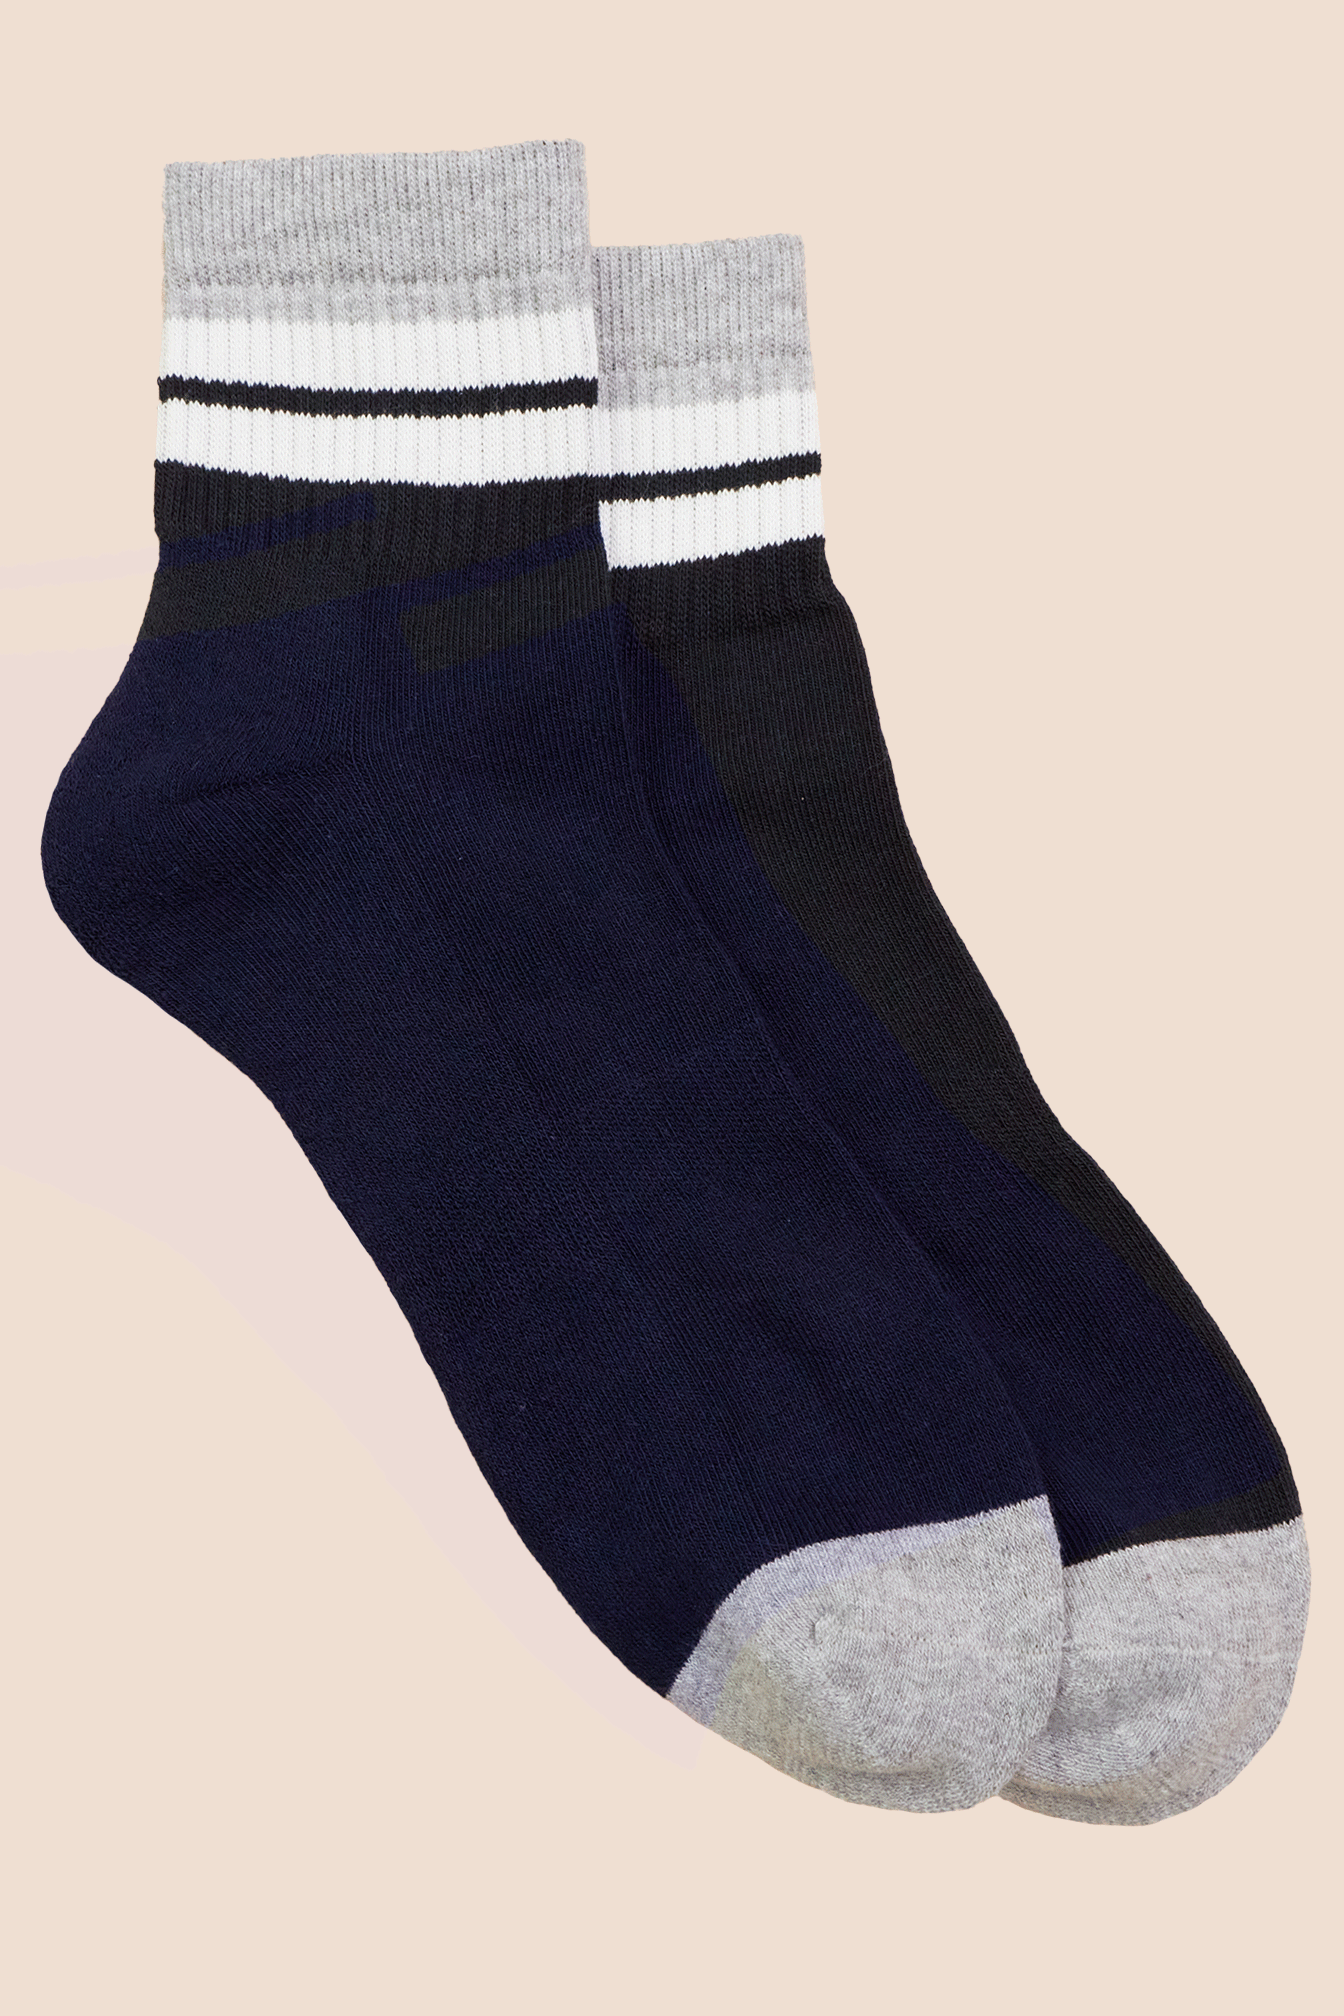 Chaussettes sportswear homme TENNIS beige made in France coton